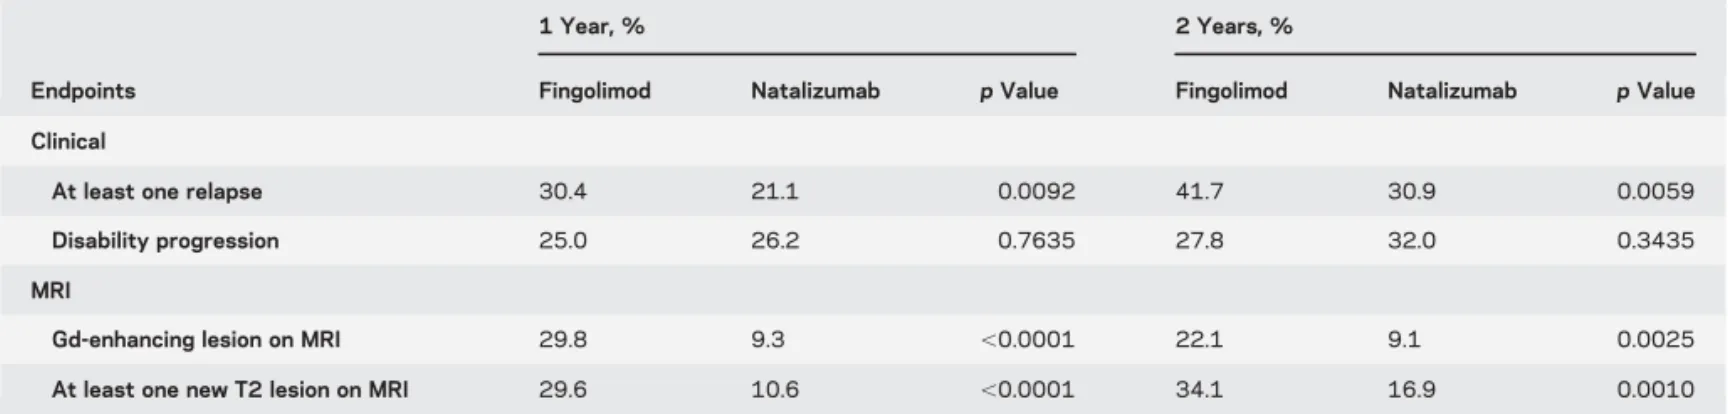 Table 3 Comparisons of endpoints at 1 and 2 years post-treatment initiation according to treatment group: Results from the confounder- confounder-adjusted a proportions obtained by propensity score weighting